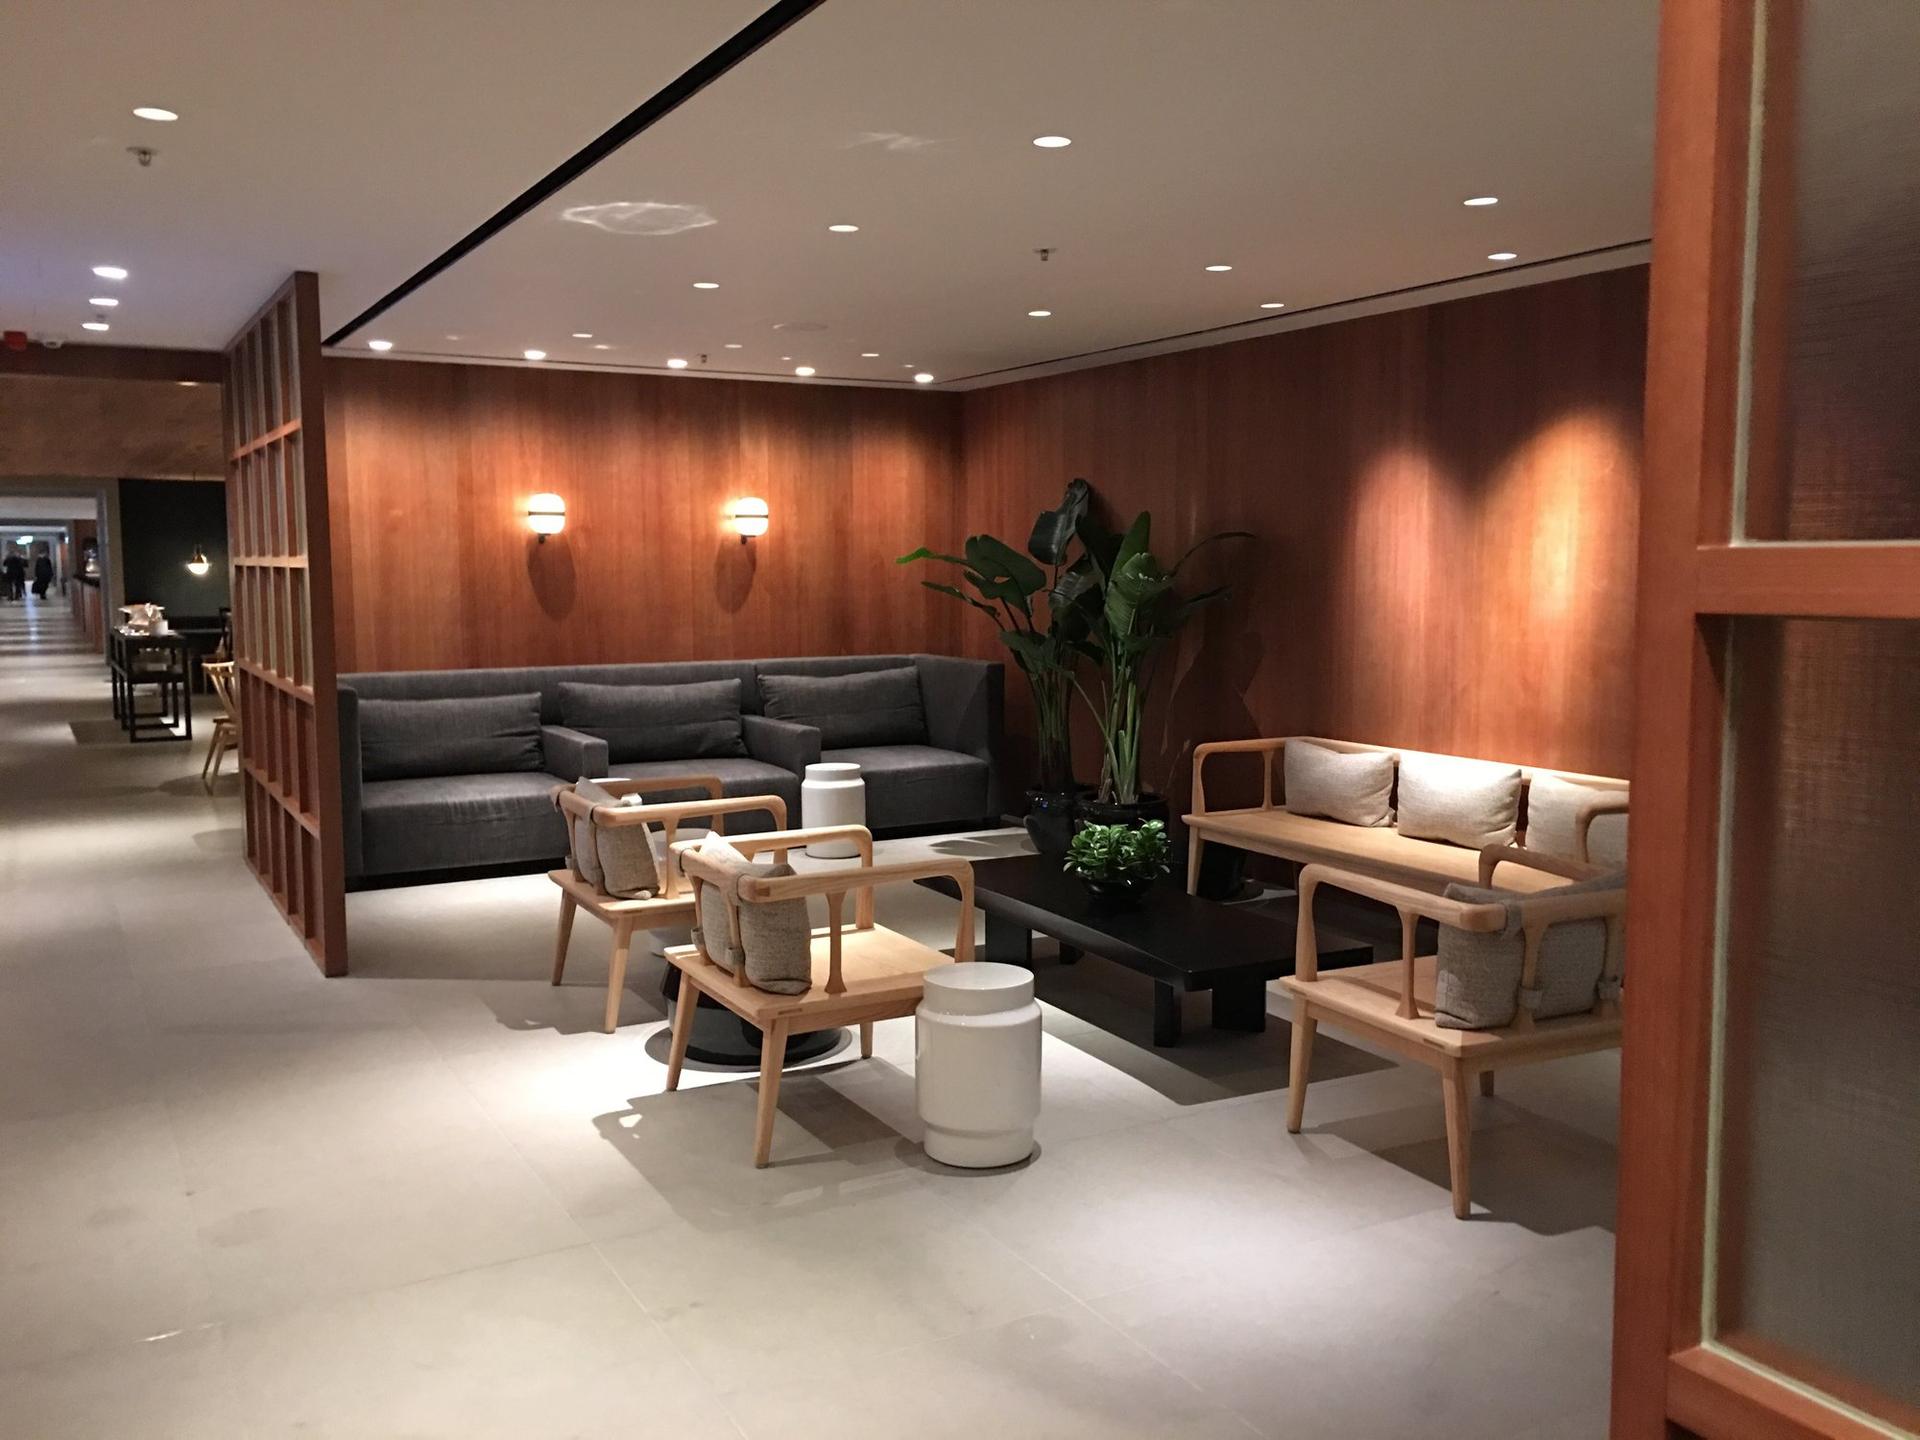 Cathay Pacific The Pier Business Class Lounge image 39 of 61